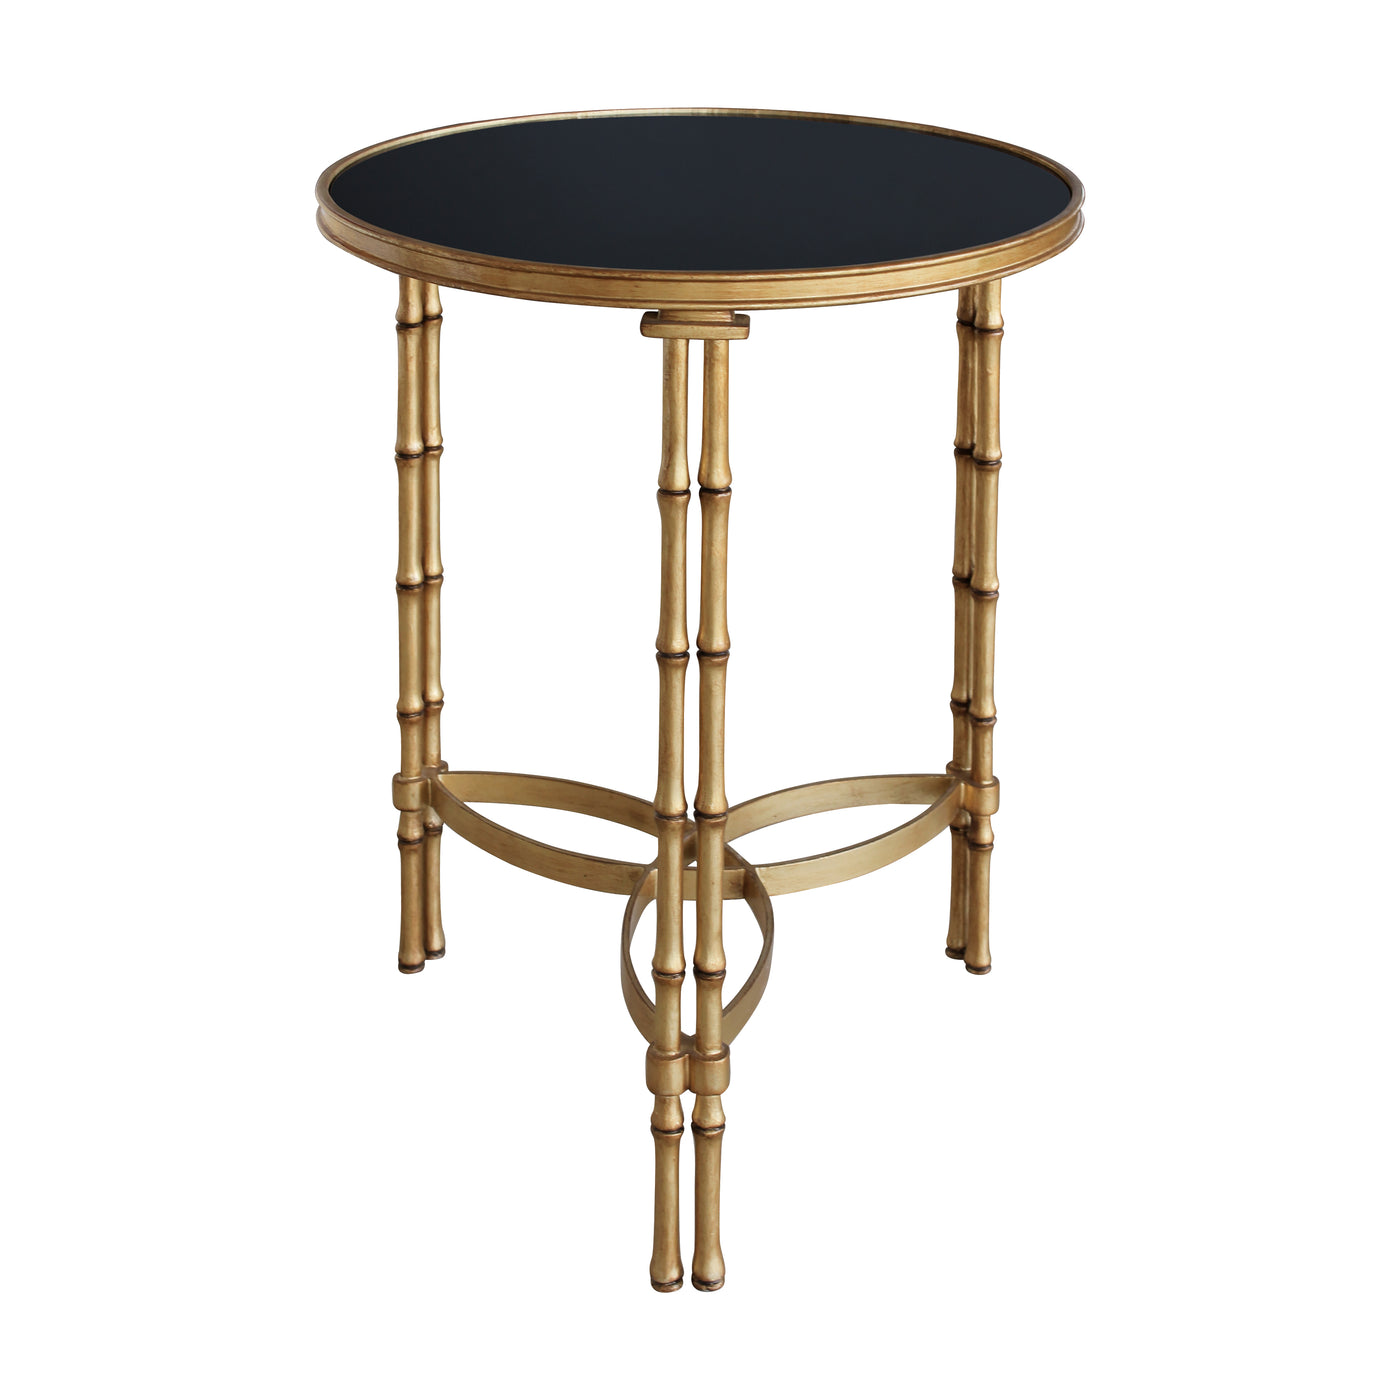 Contemporary metal made side table with bamboo legs